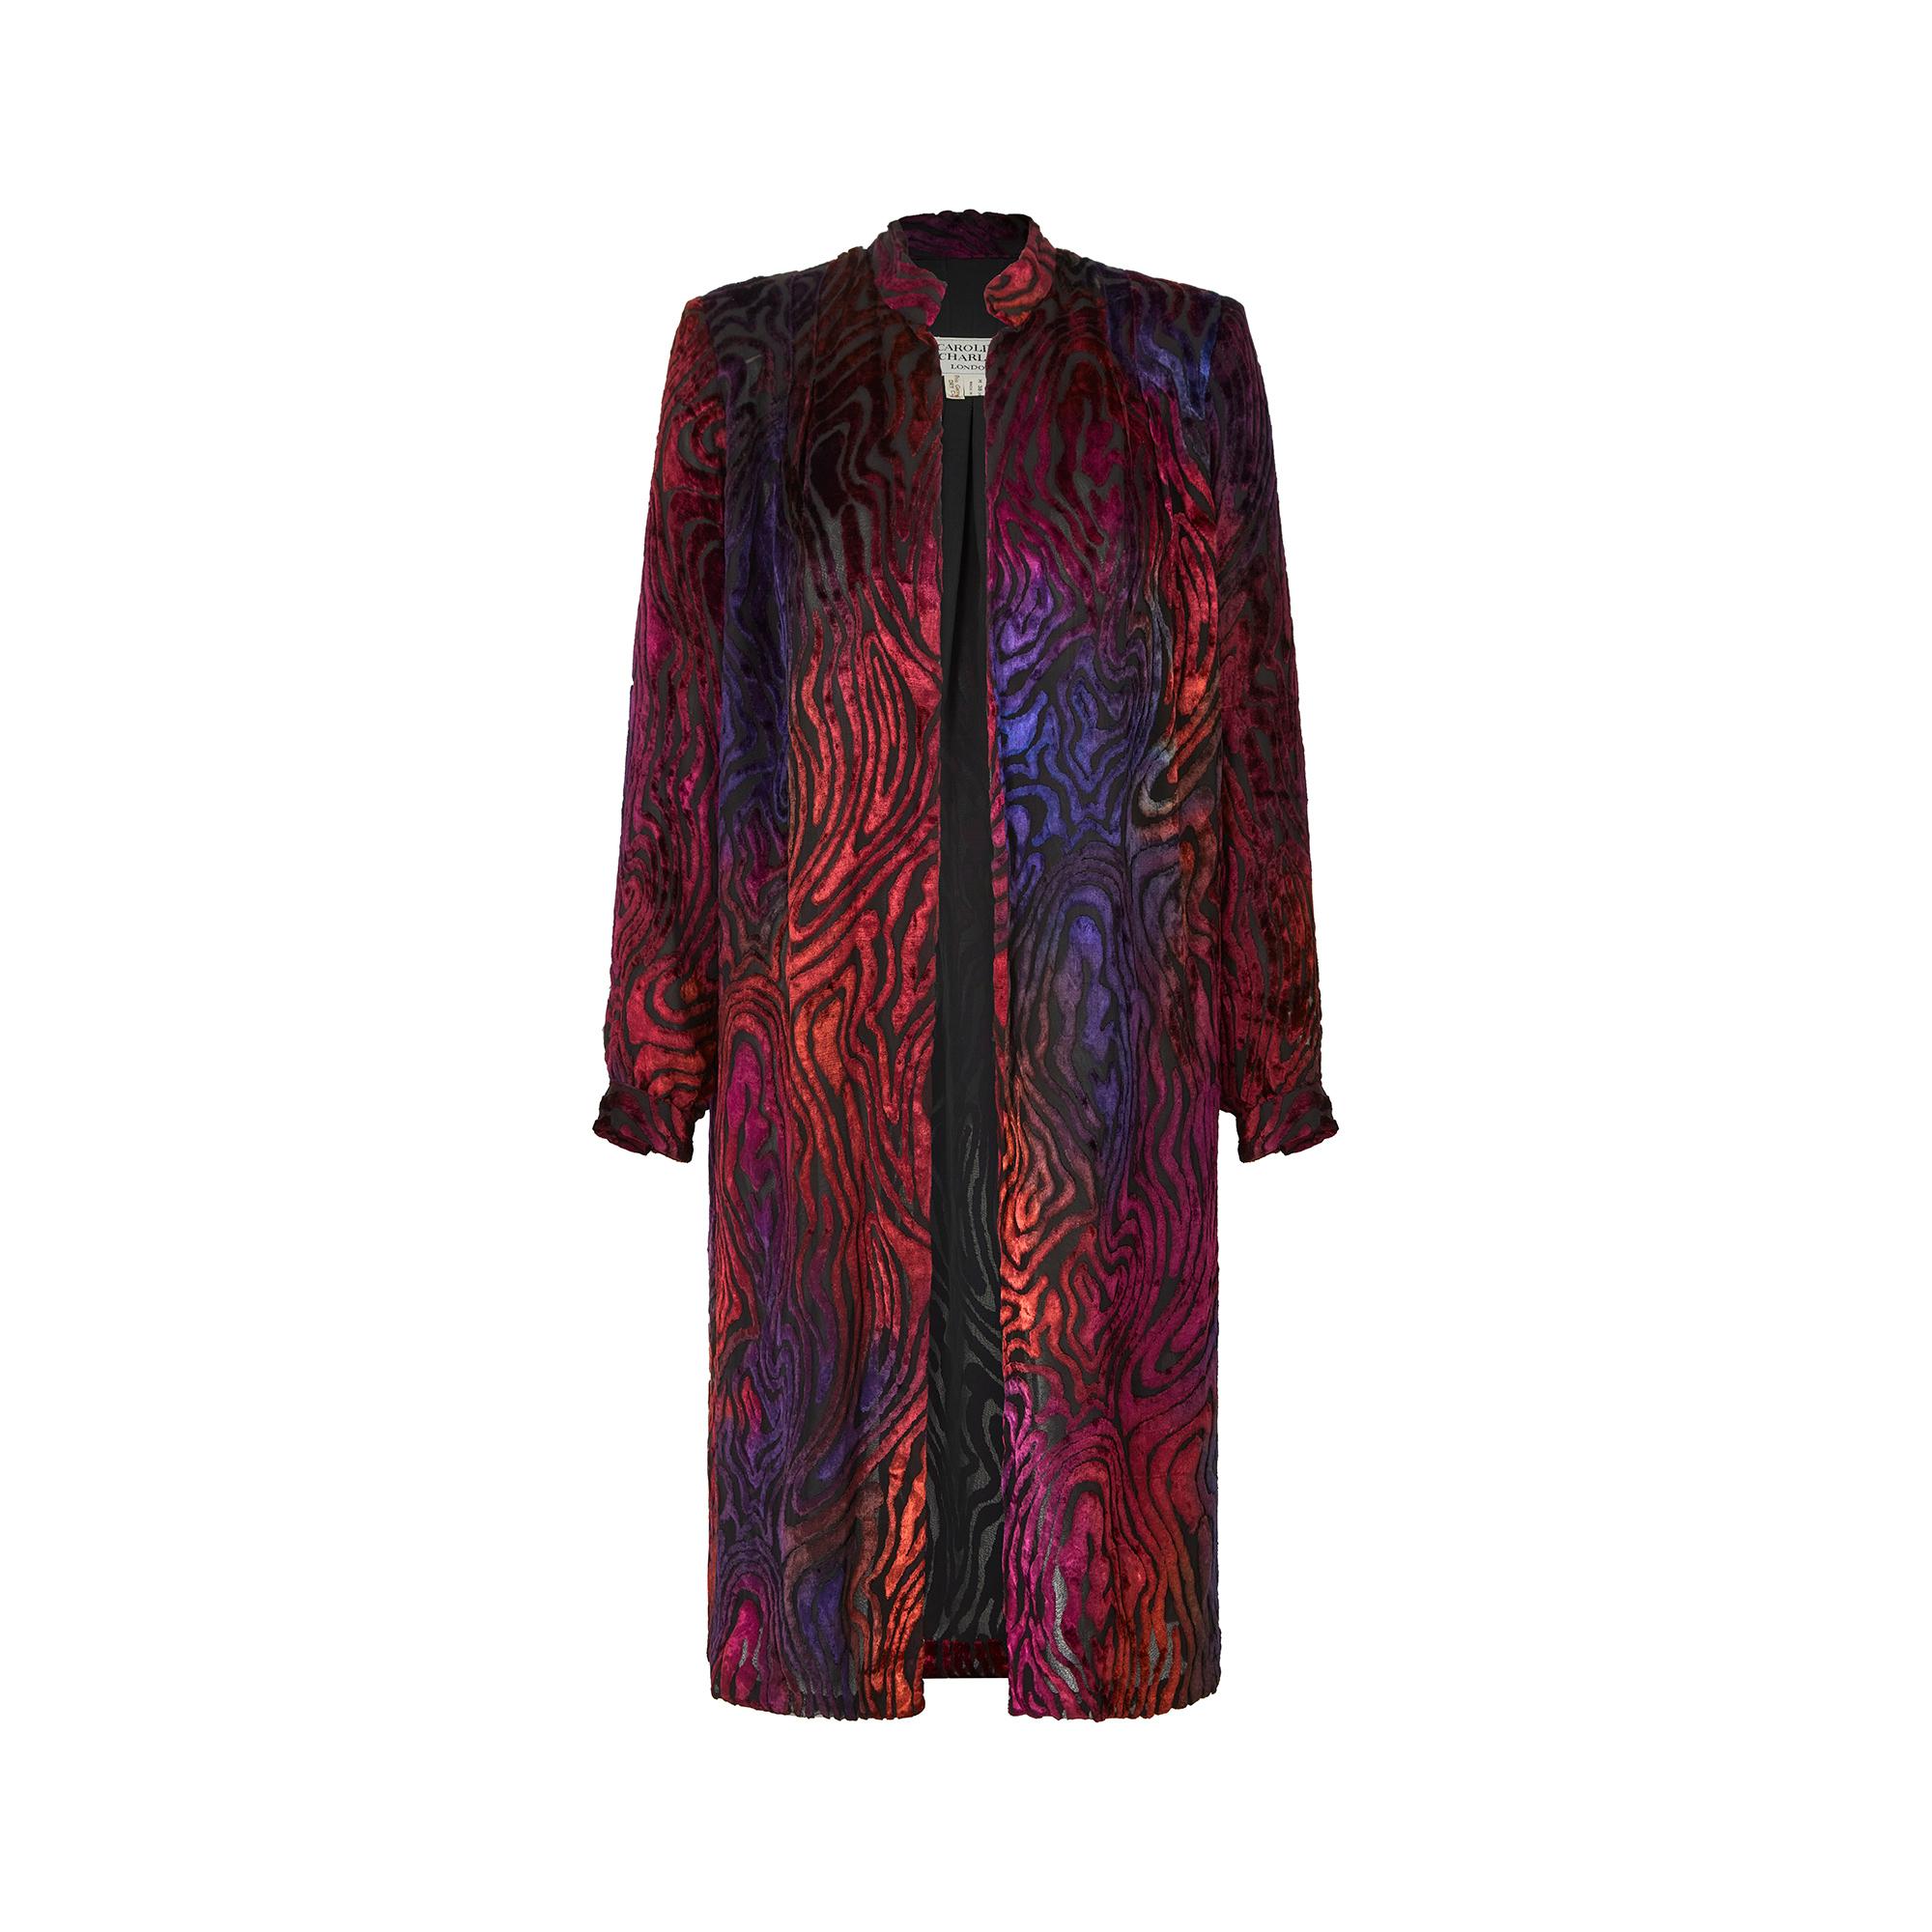 This is a striking Caroline Charles burnout velvet silk jacket, complete with vibrant autumnal colours for the colder seasons. It is cut in a loose, flowing shape with a simple high neck collar, and has draped, loose sleeves which gather at the cuff